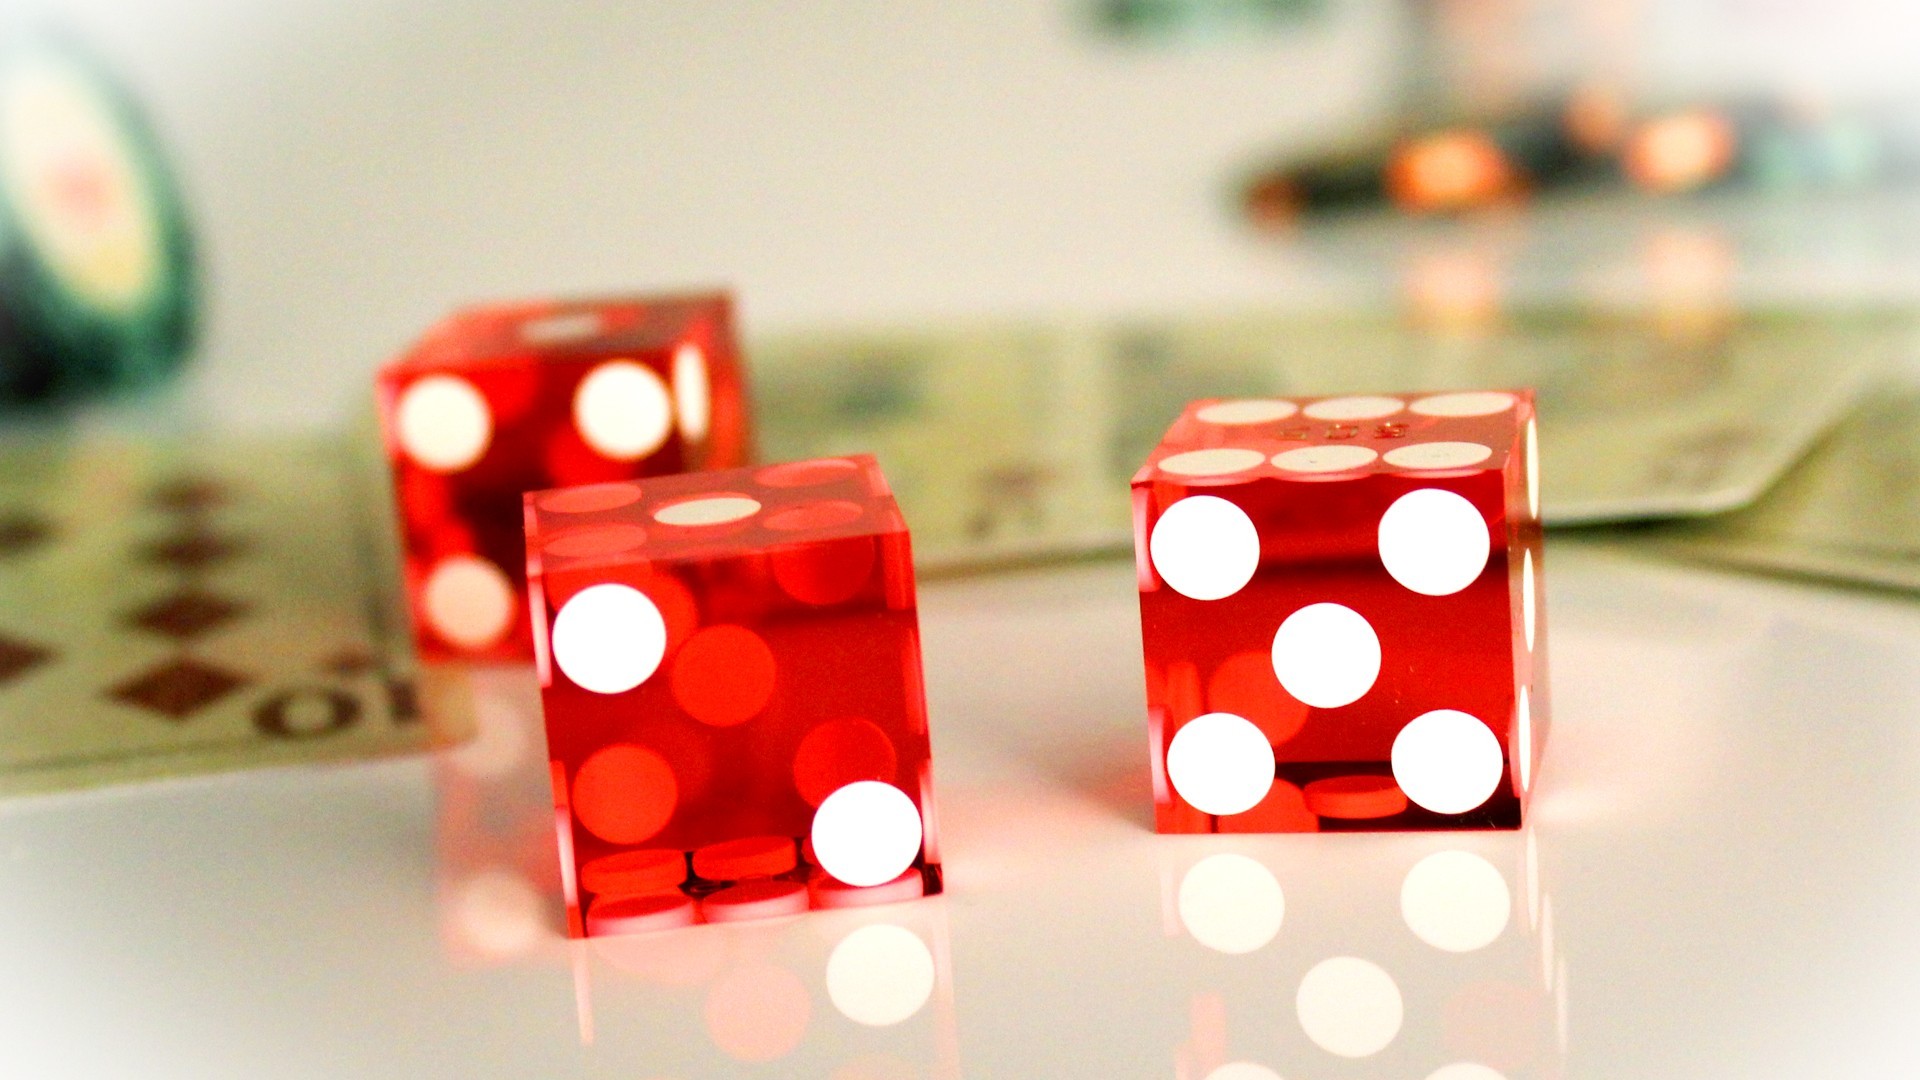 1920x1080 red dice wallpaper pictures 14200